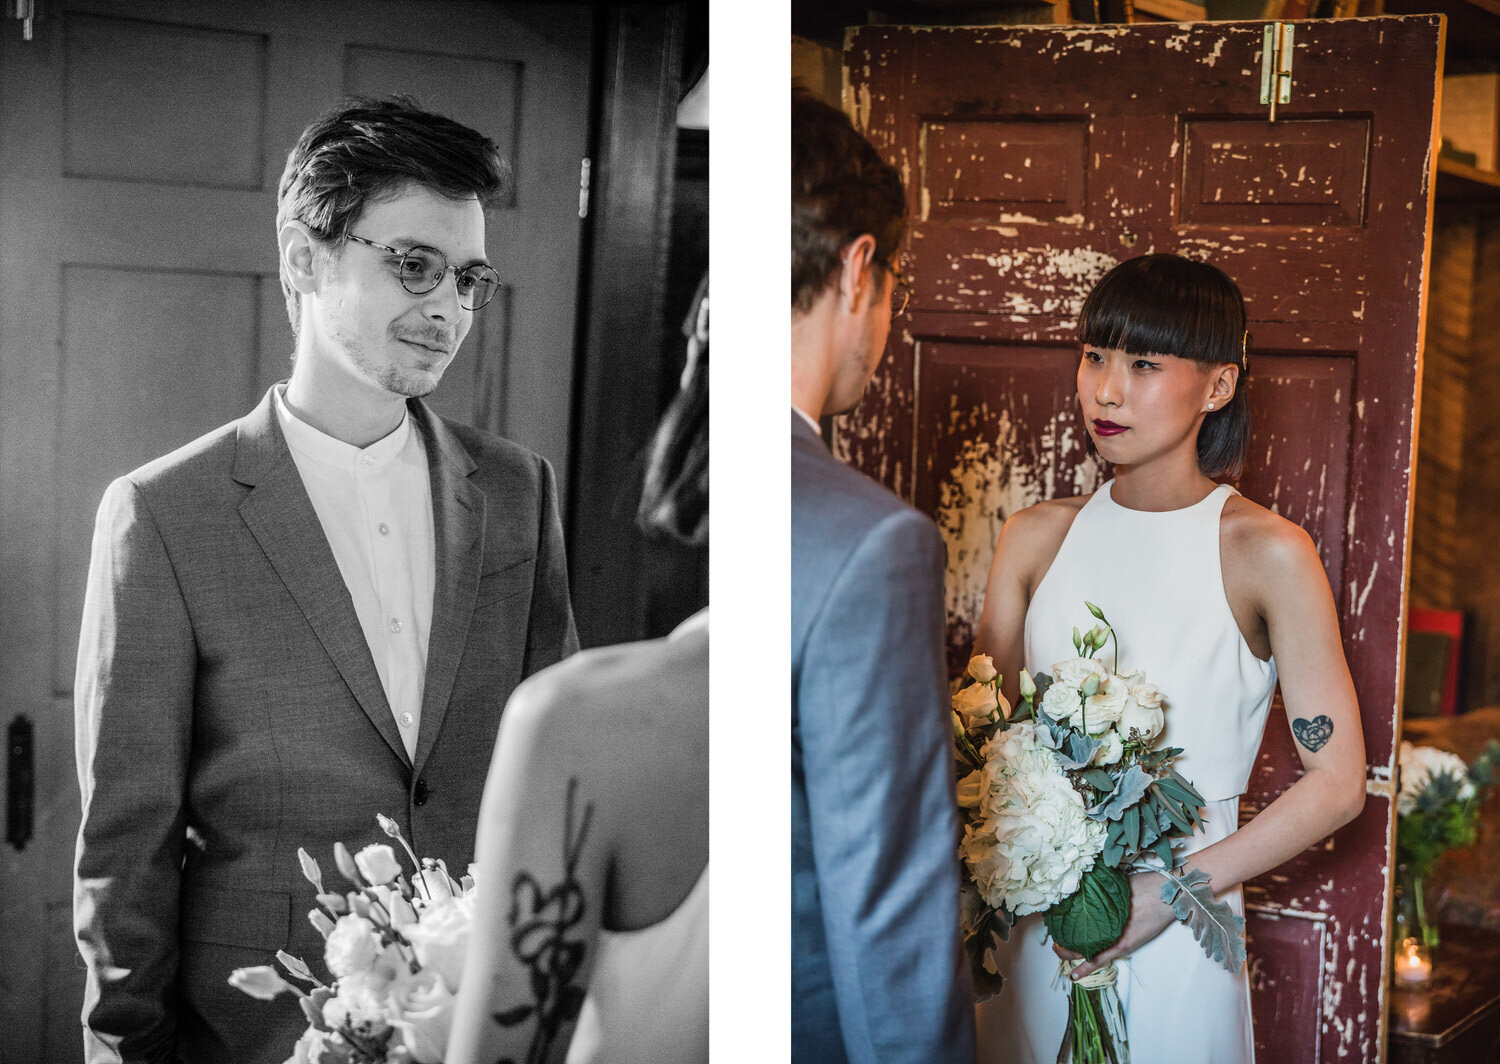 new york lowwer east side wedding intimate ceremony eclectic modern66.jpg